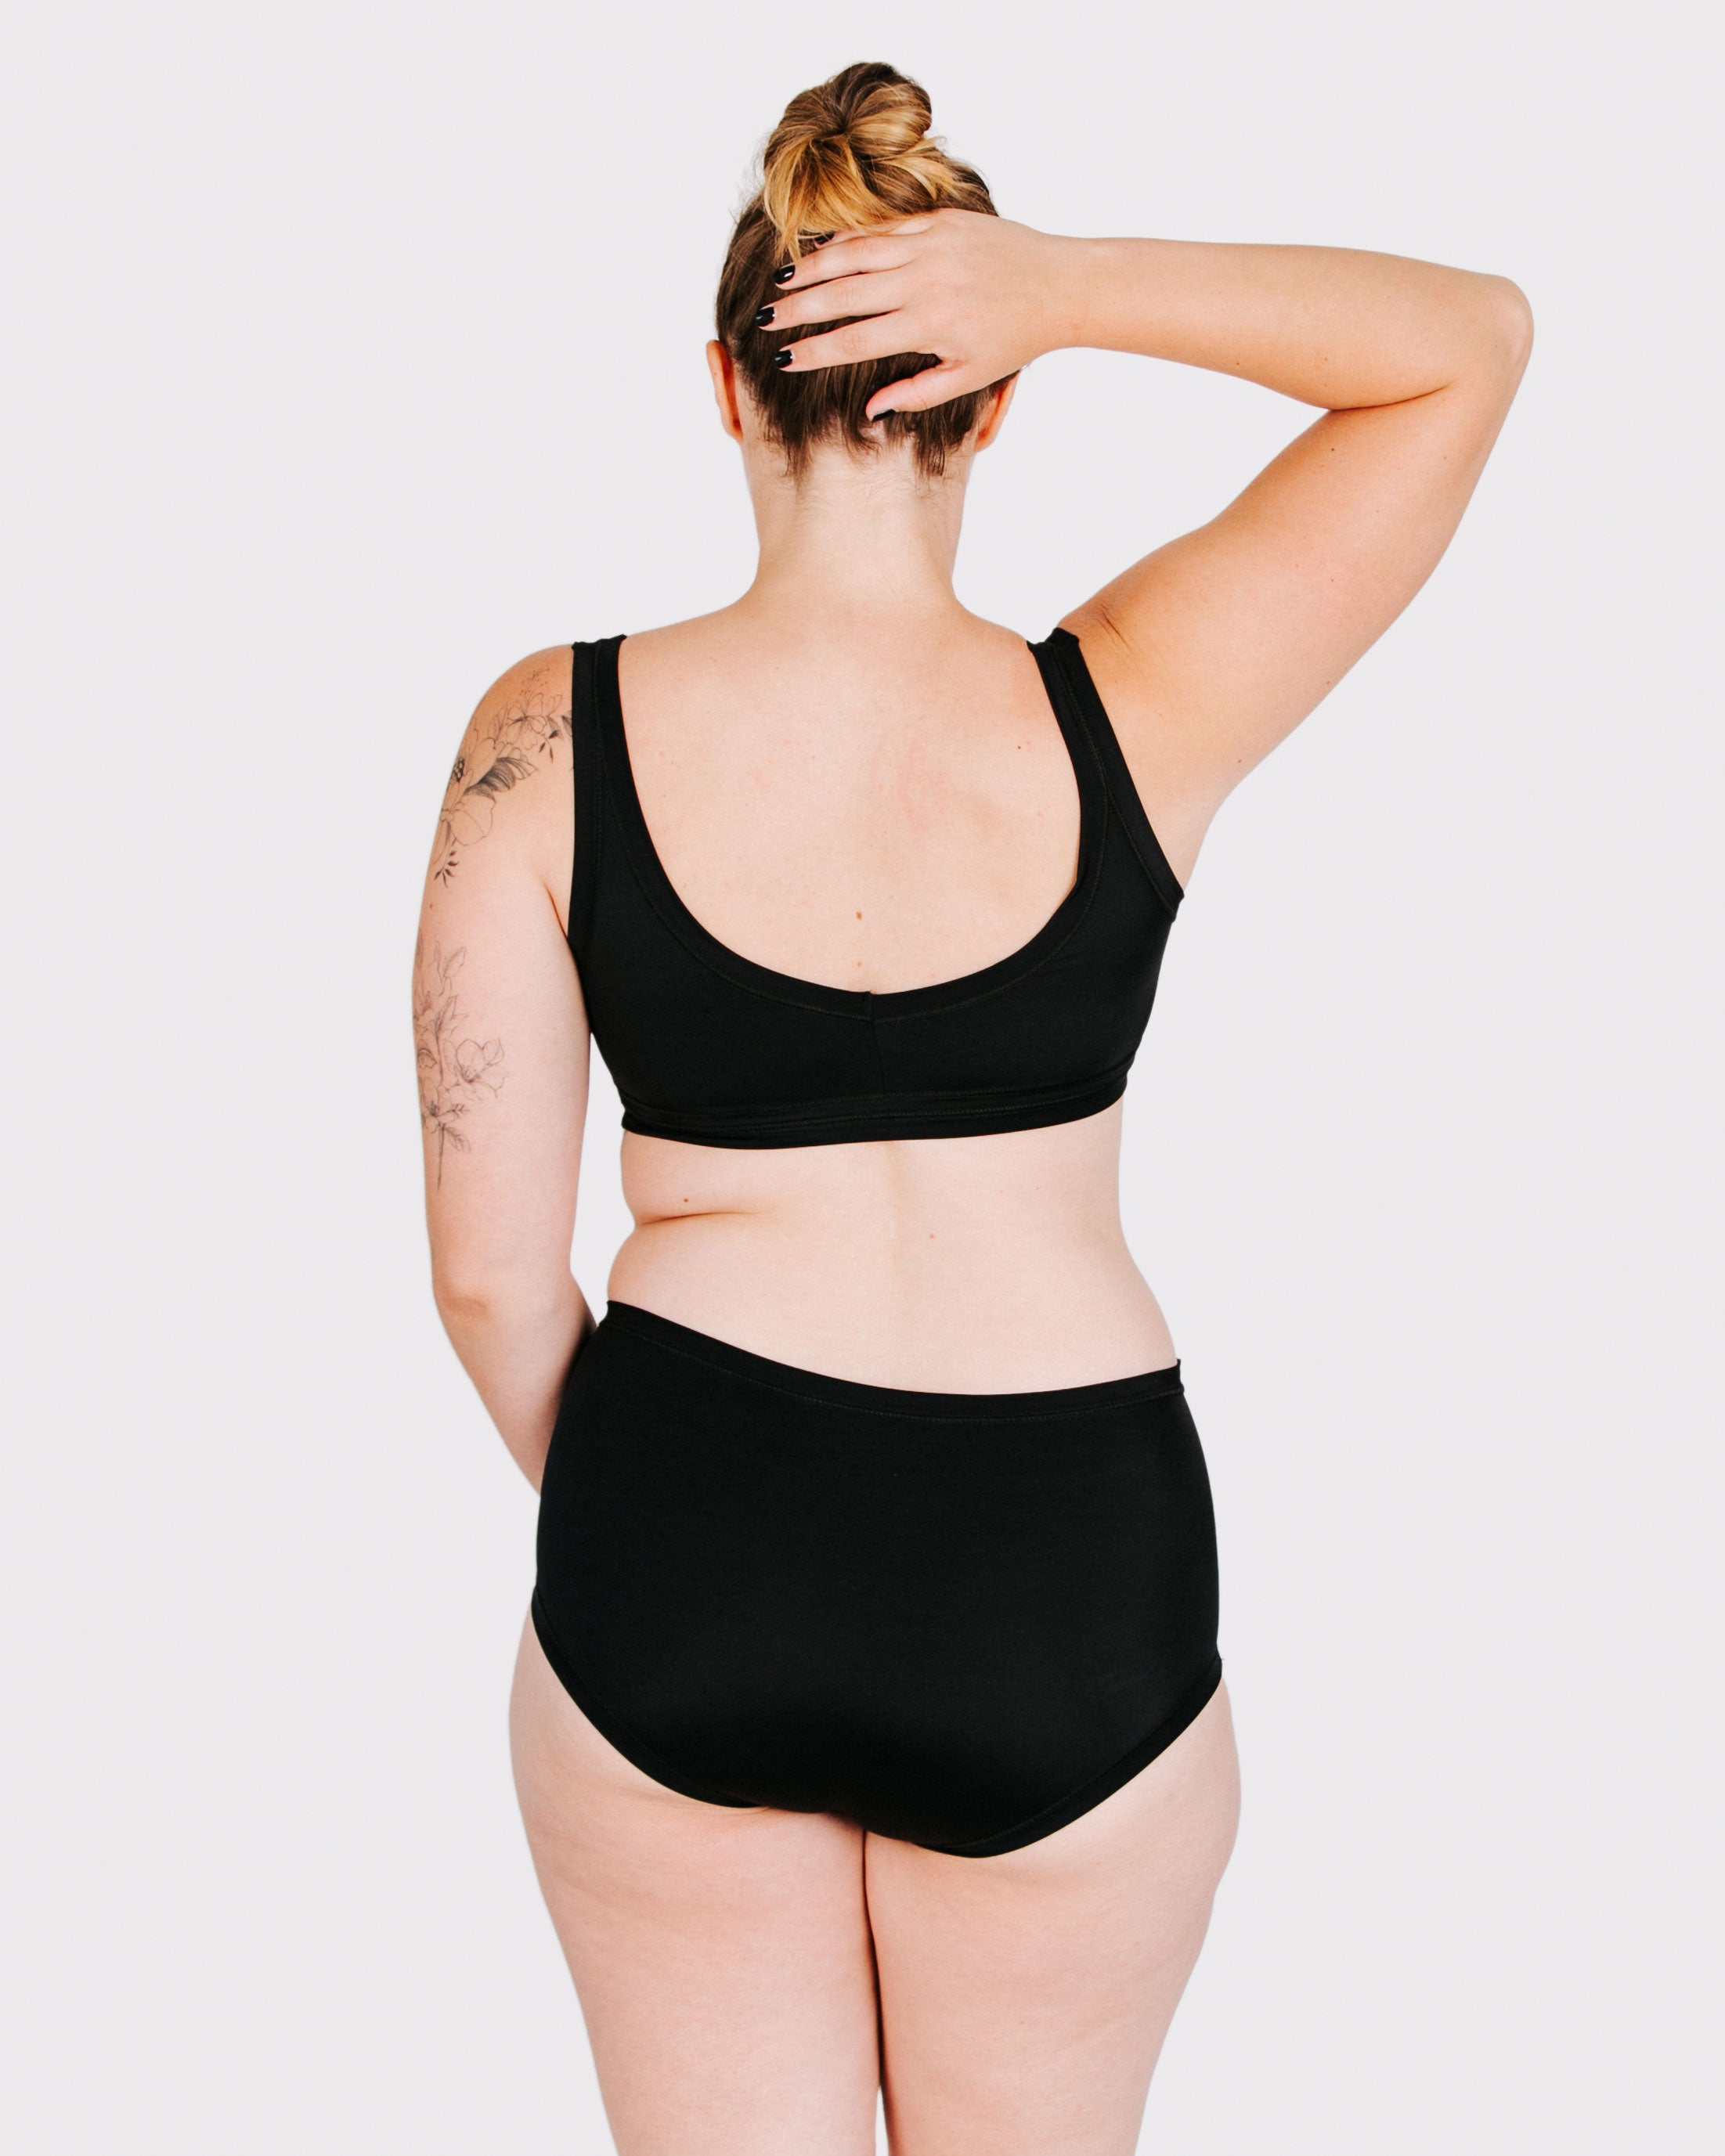 Fit photo from the back of Thunderpants recycled nylon Swimwear Original style bottoms in Plain Black, showing a wedgie-free bum, on a model.